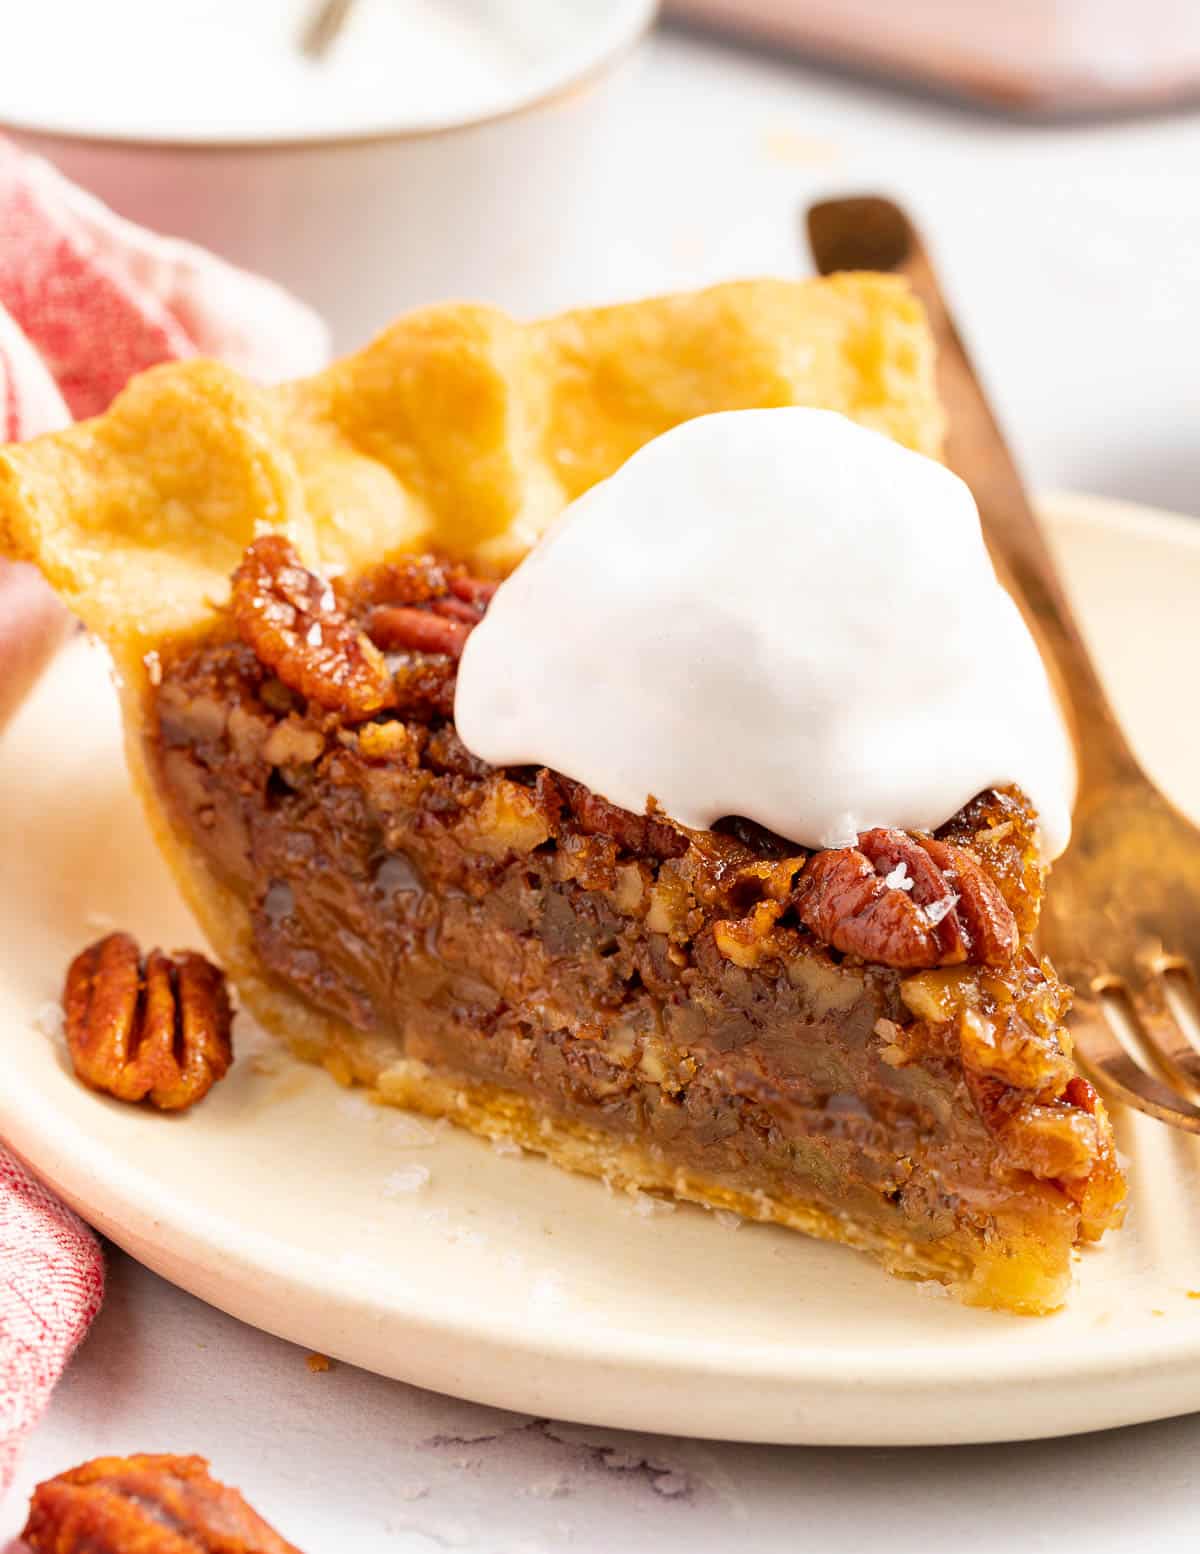 a slice of pecan pie with cocowhip